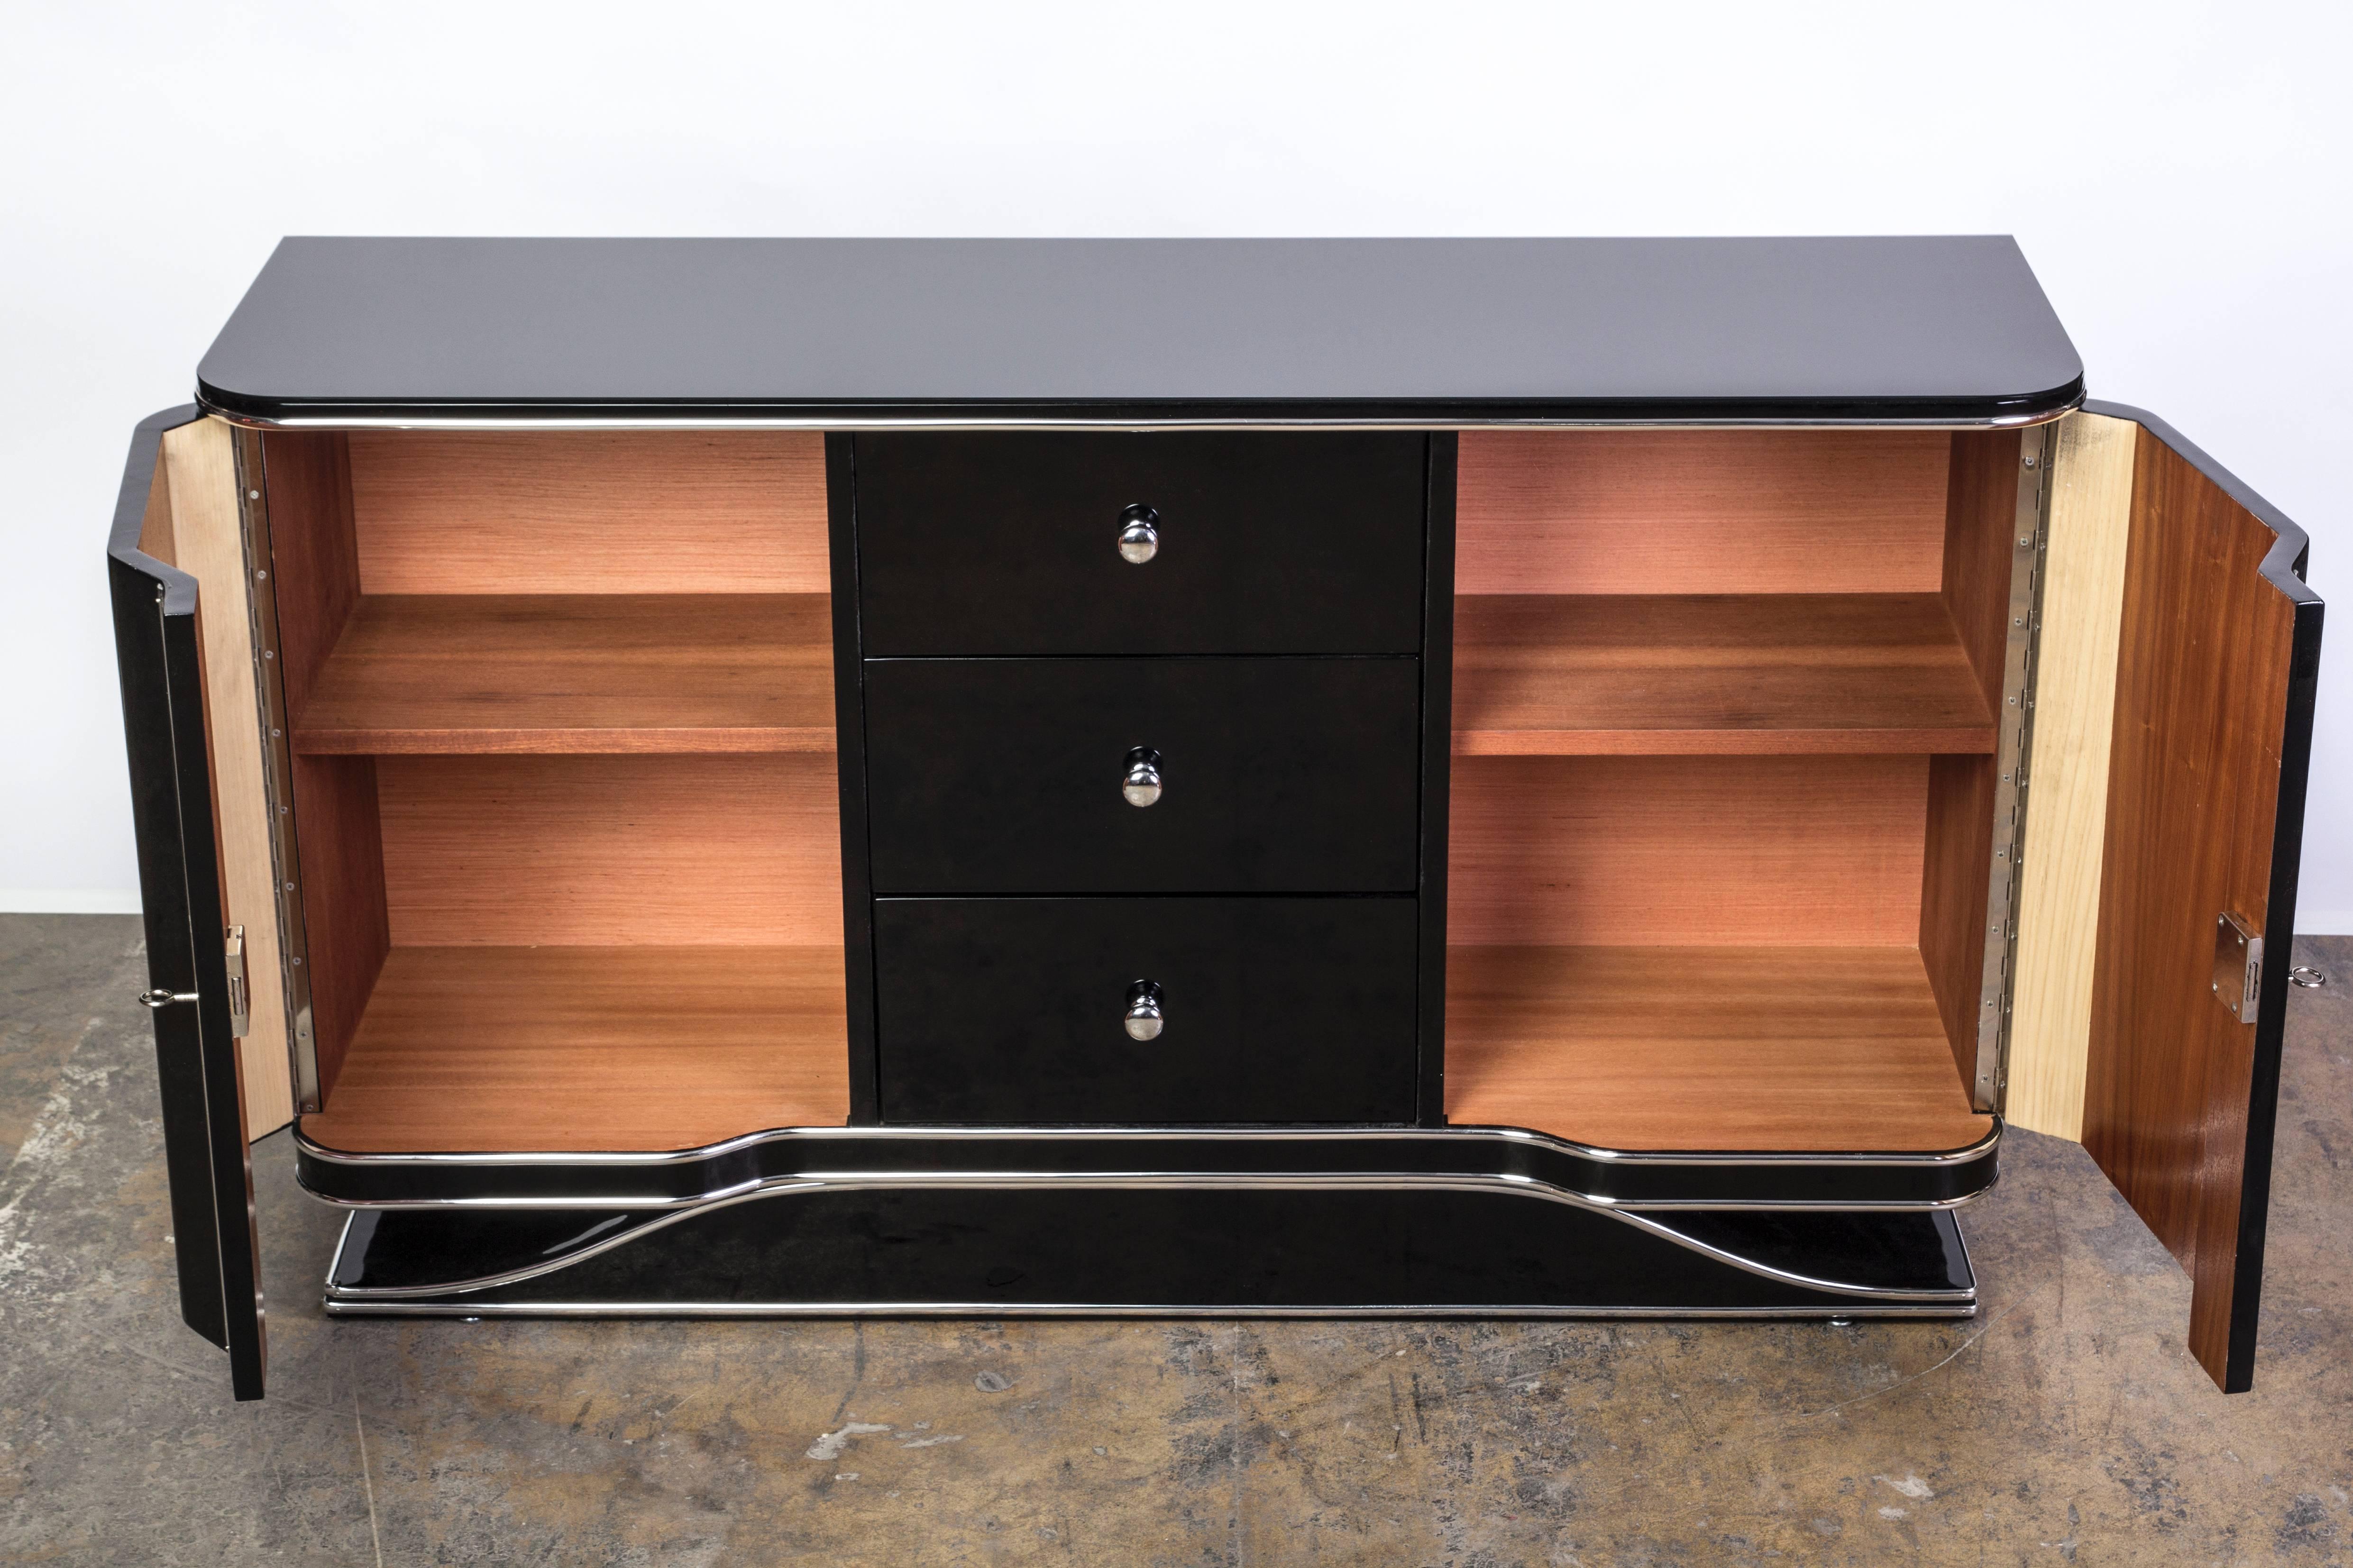 This beautiful Art Deco sideboard or credenza features two (2) curved doors, three (3) center drawers and chrome fittings and fixtures, finished in a high gloss black lacquer.